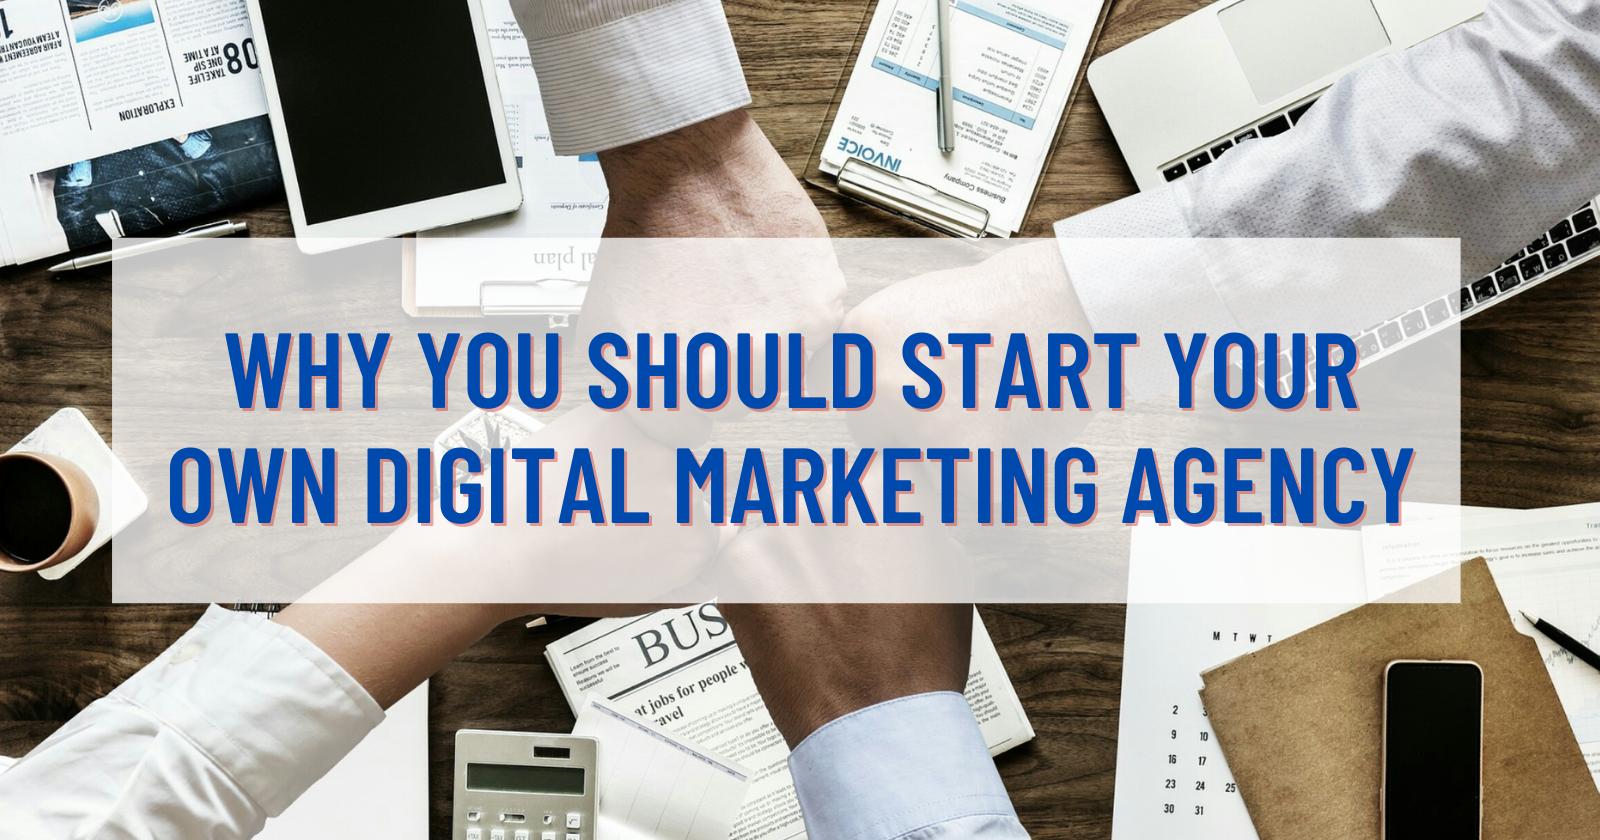 Digital Marketing: The Right Way to Do It